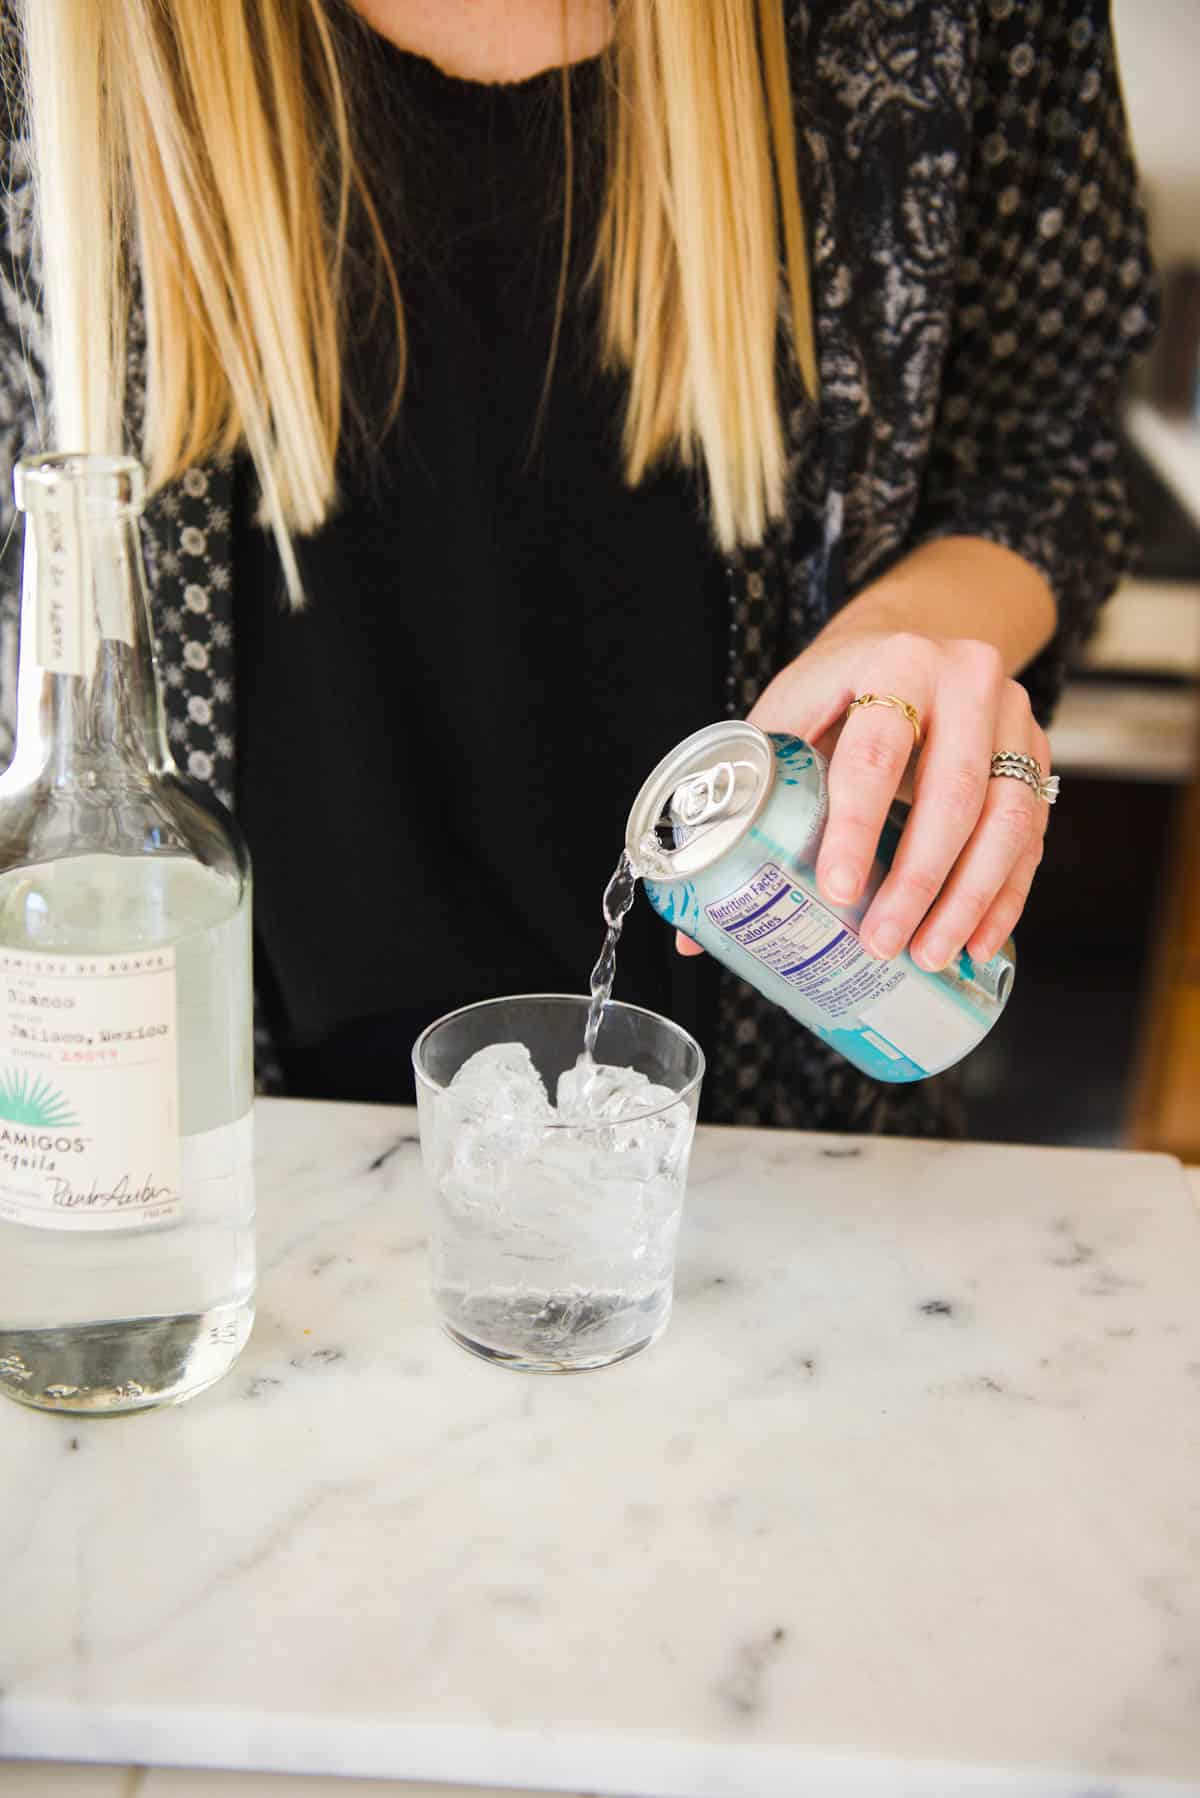 Woman adding club soda to a glass on a counter.